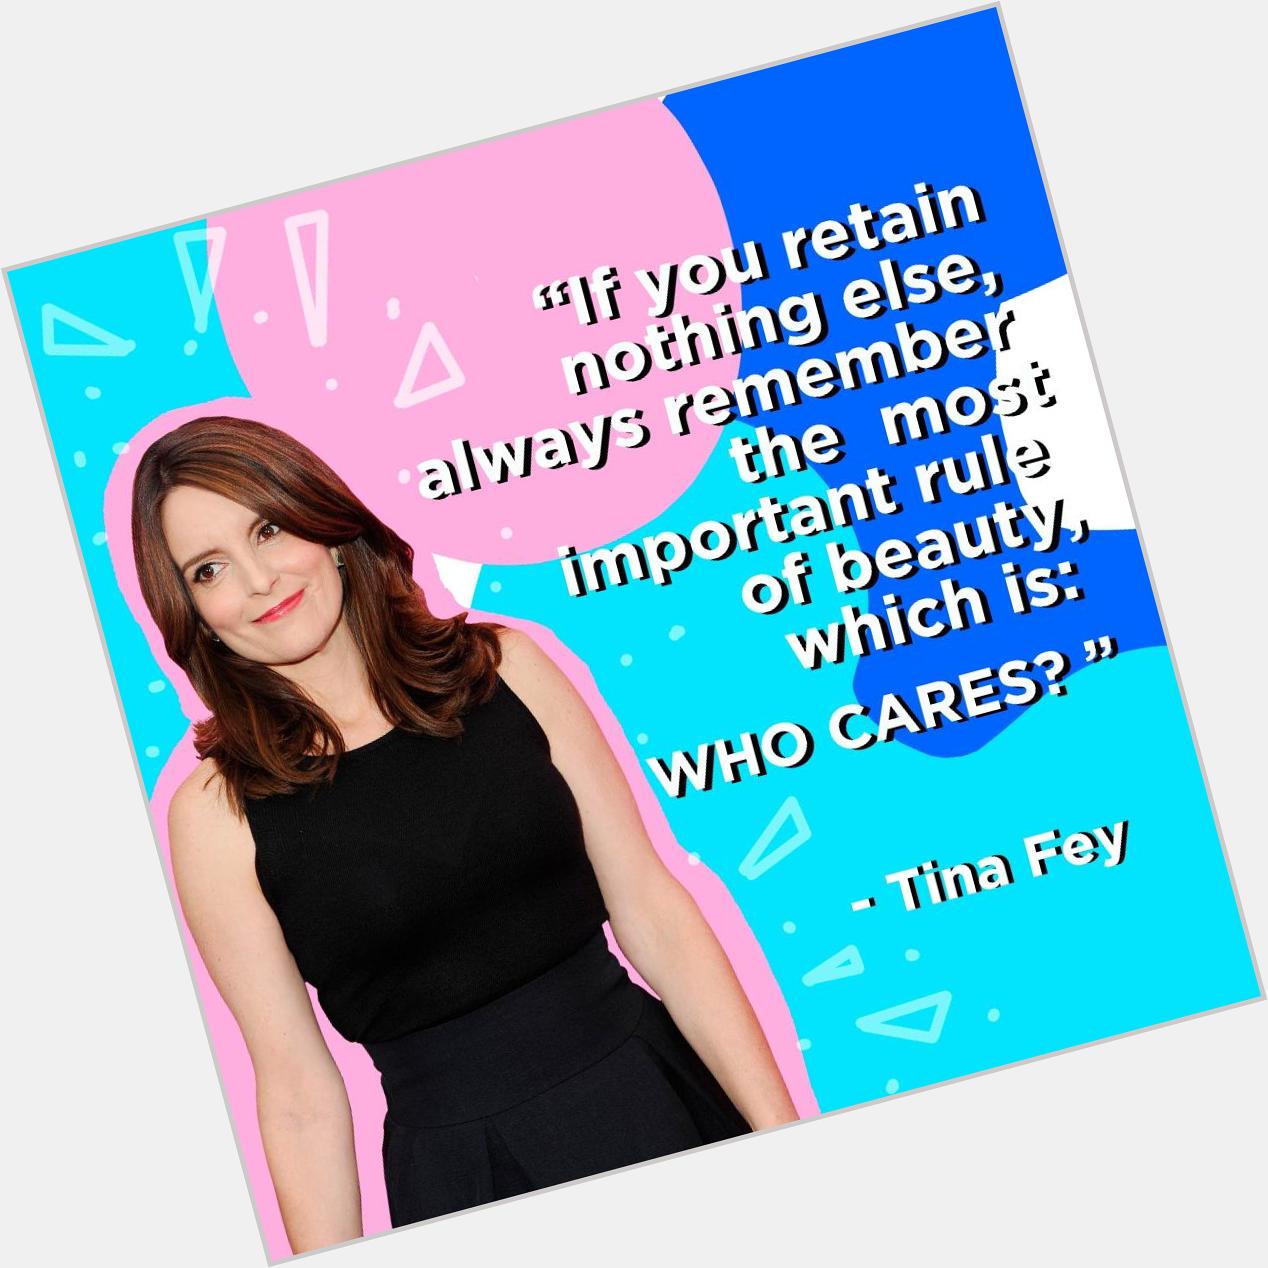 Happy Birthday, Tina Fey! Thanks for the belly laughs and beauty advice. 